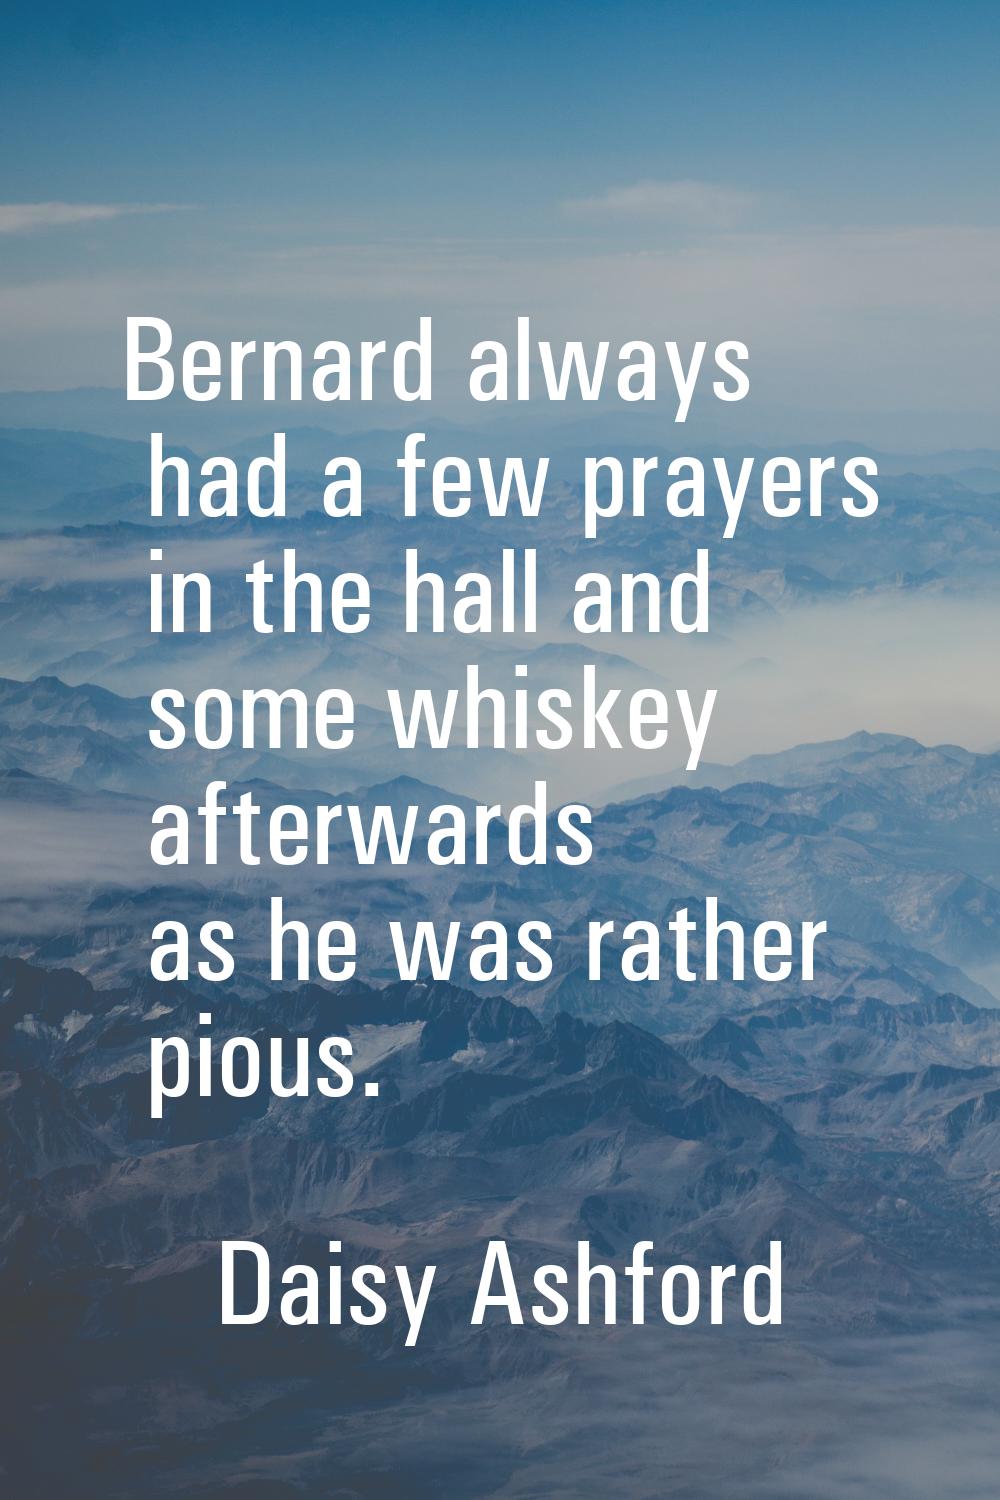 Bernard always had a few prayers in the hall and some whiskey afterwards as he was rather pious.